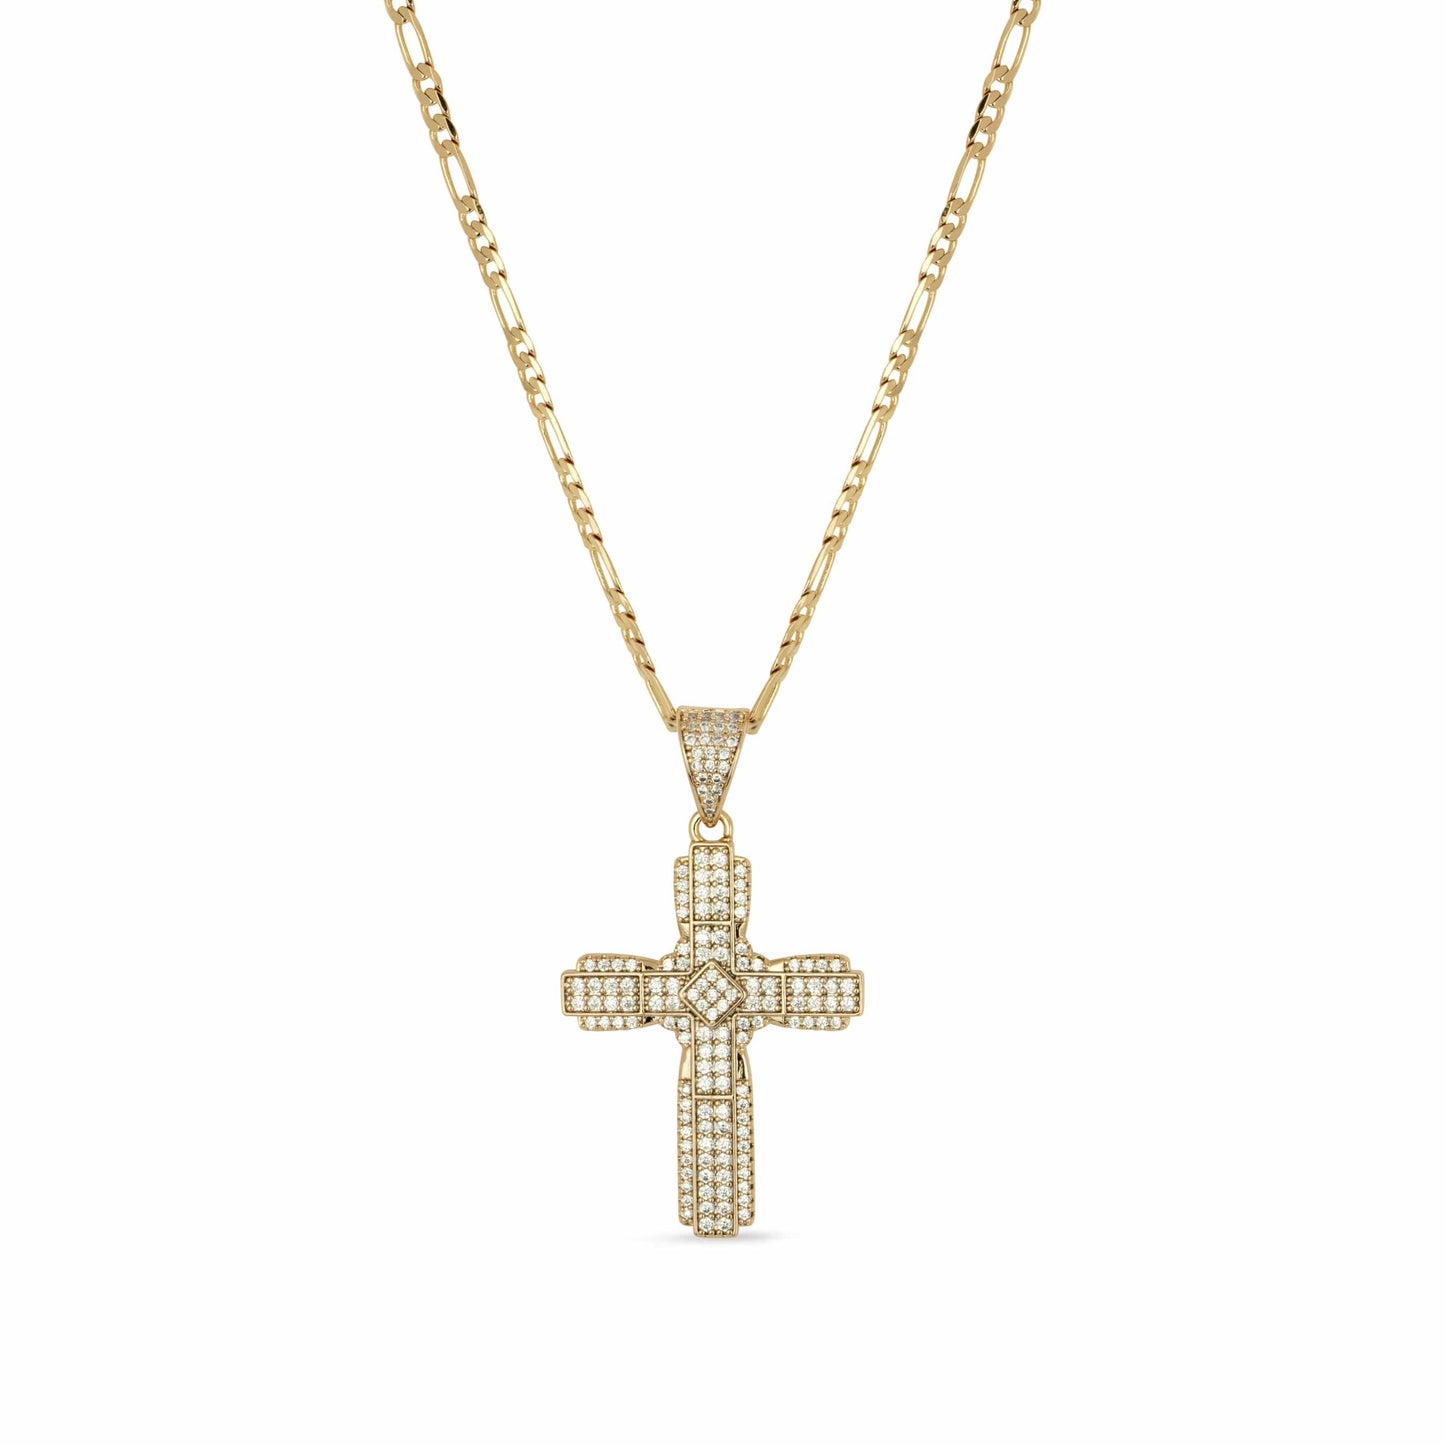 Gold Cross Pendant Encrusted with Cubic Zirconia Details - Love & Lilly Jewellery